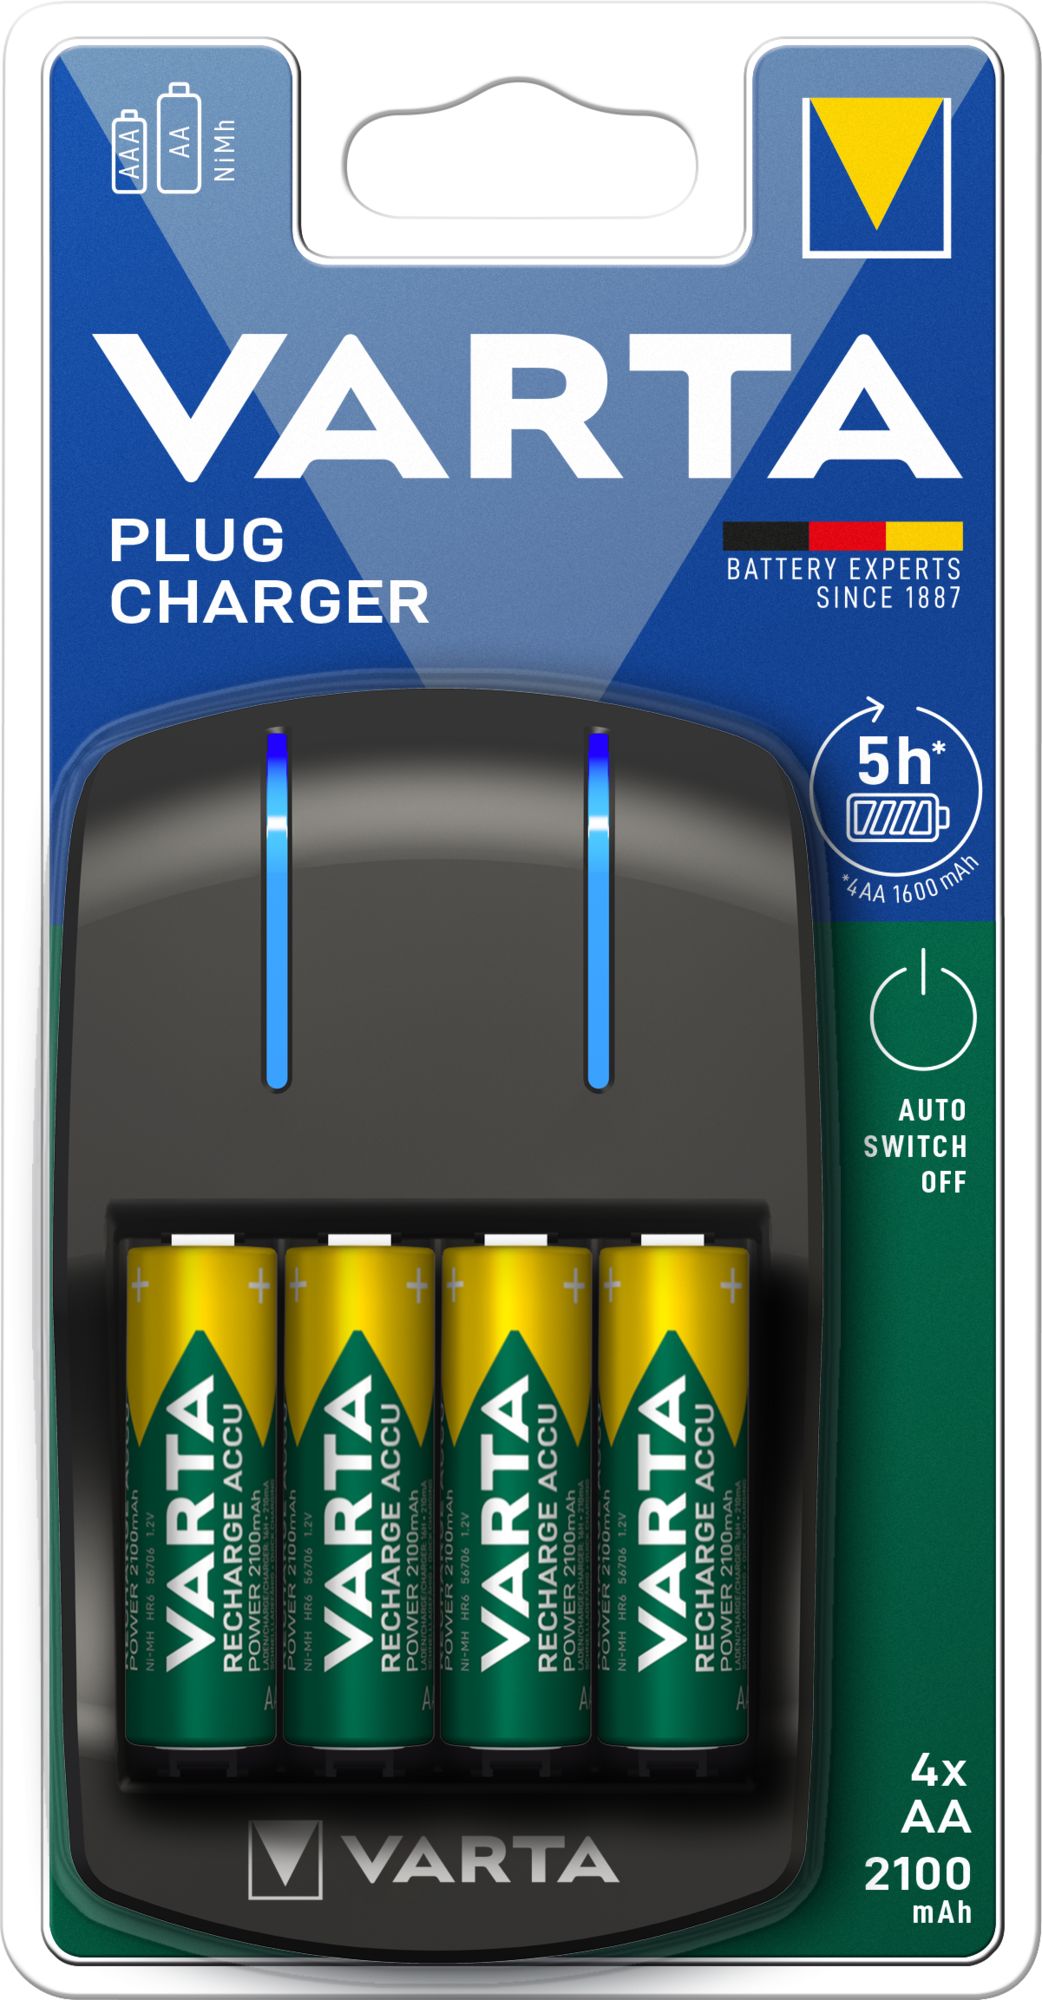 VARTA Plug charger - chargeur pour piles rechargeables AA/AAA avec 4 piles AA LR06